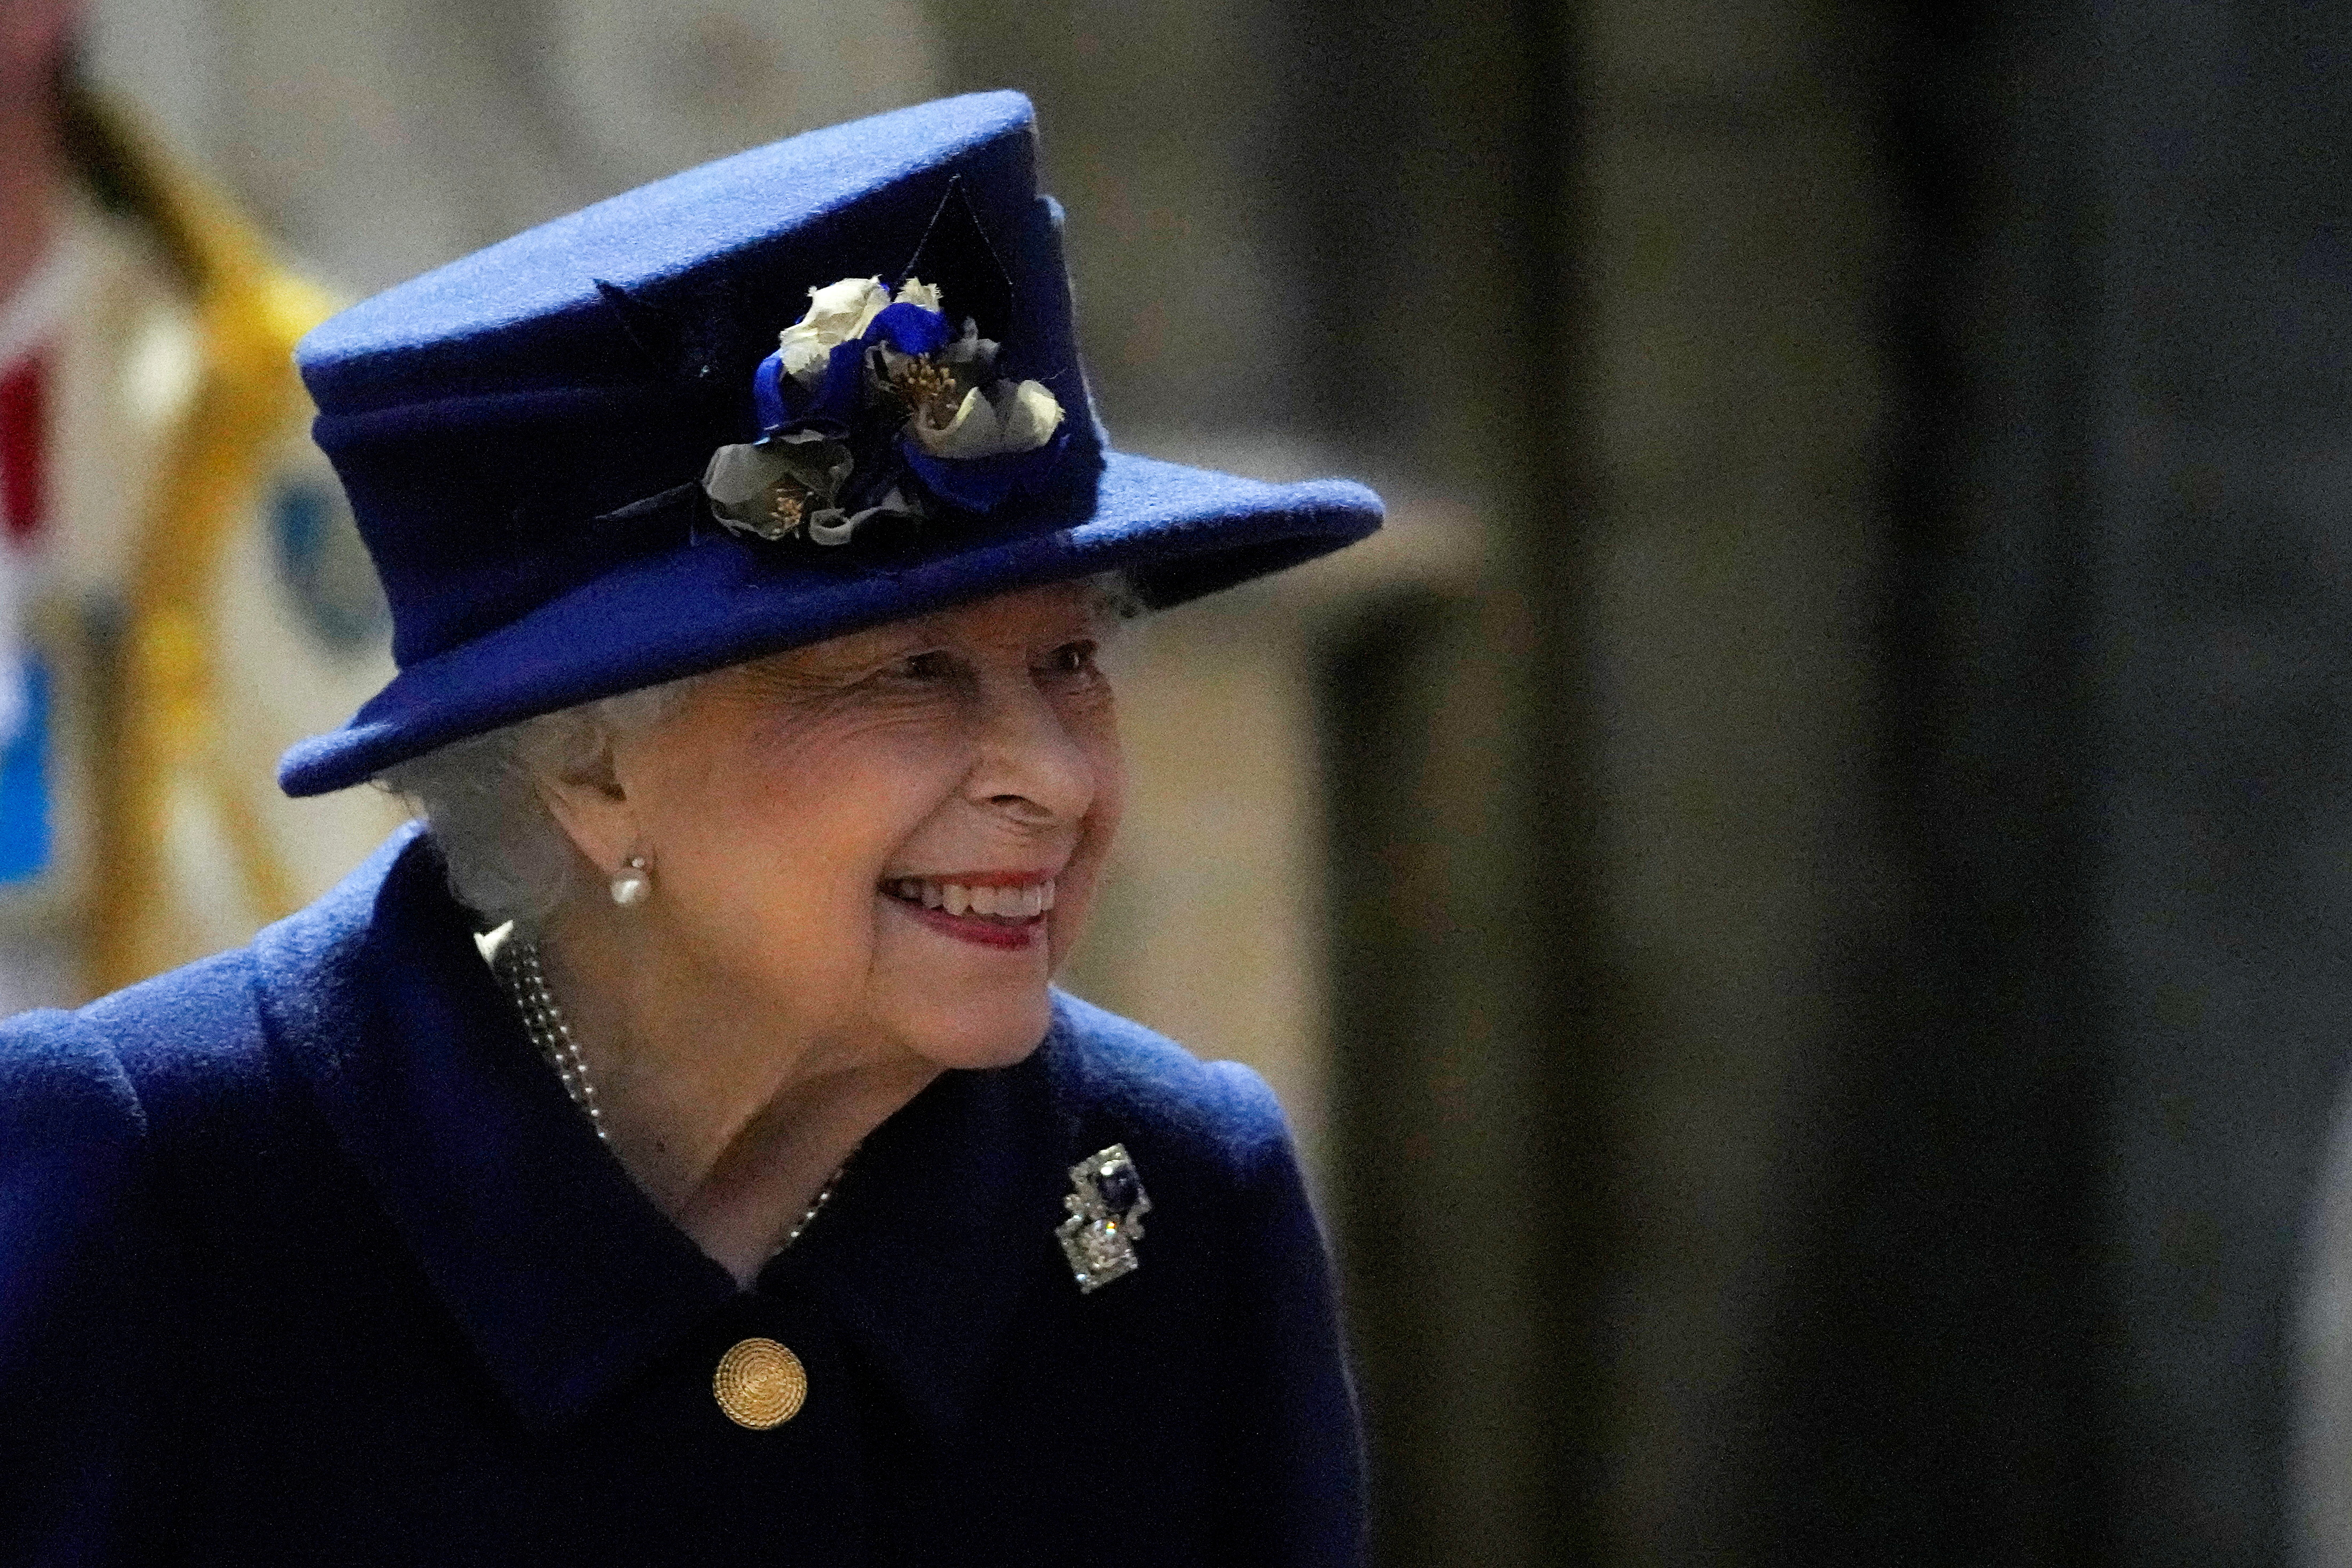 Britain's Queen Elizabeth attends a Service of Thanksgiving to mark the Centenary of the Royal British Legion at Westminster Abbey, London, Britain October 12, 2021. Frank Augstein/Pool via REUTERS